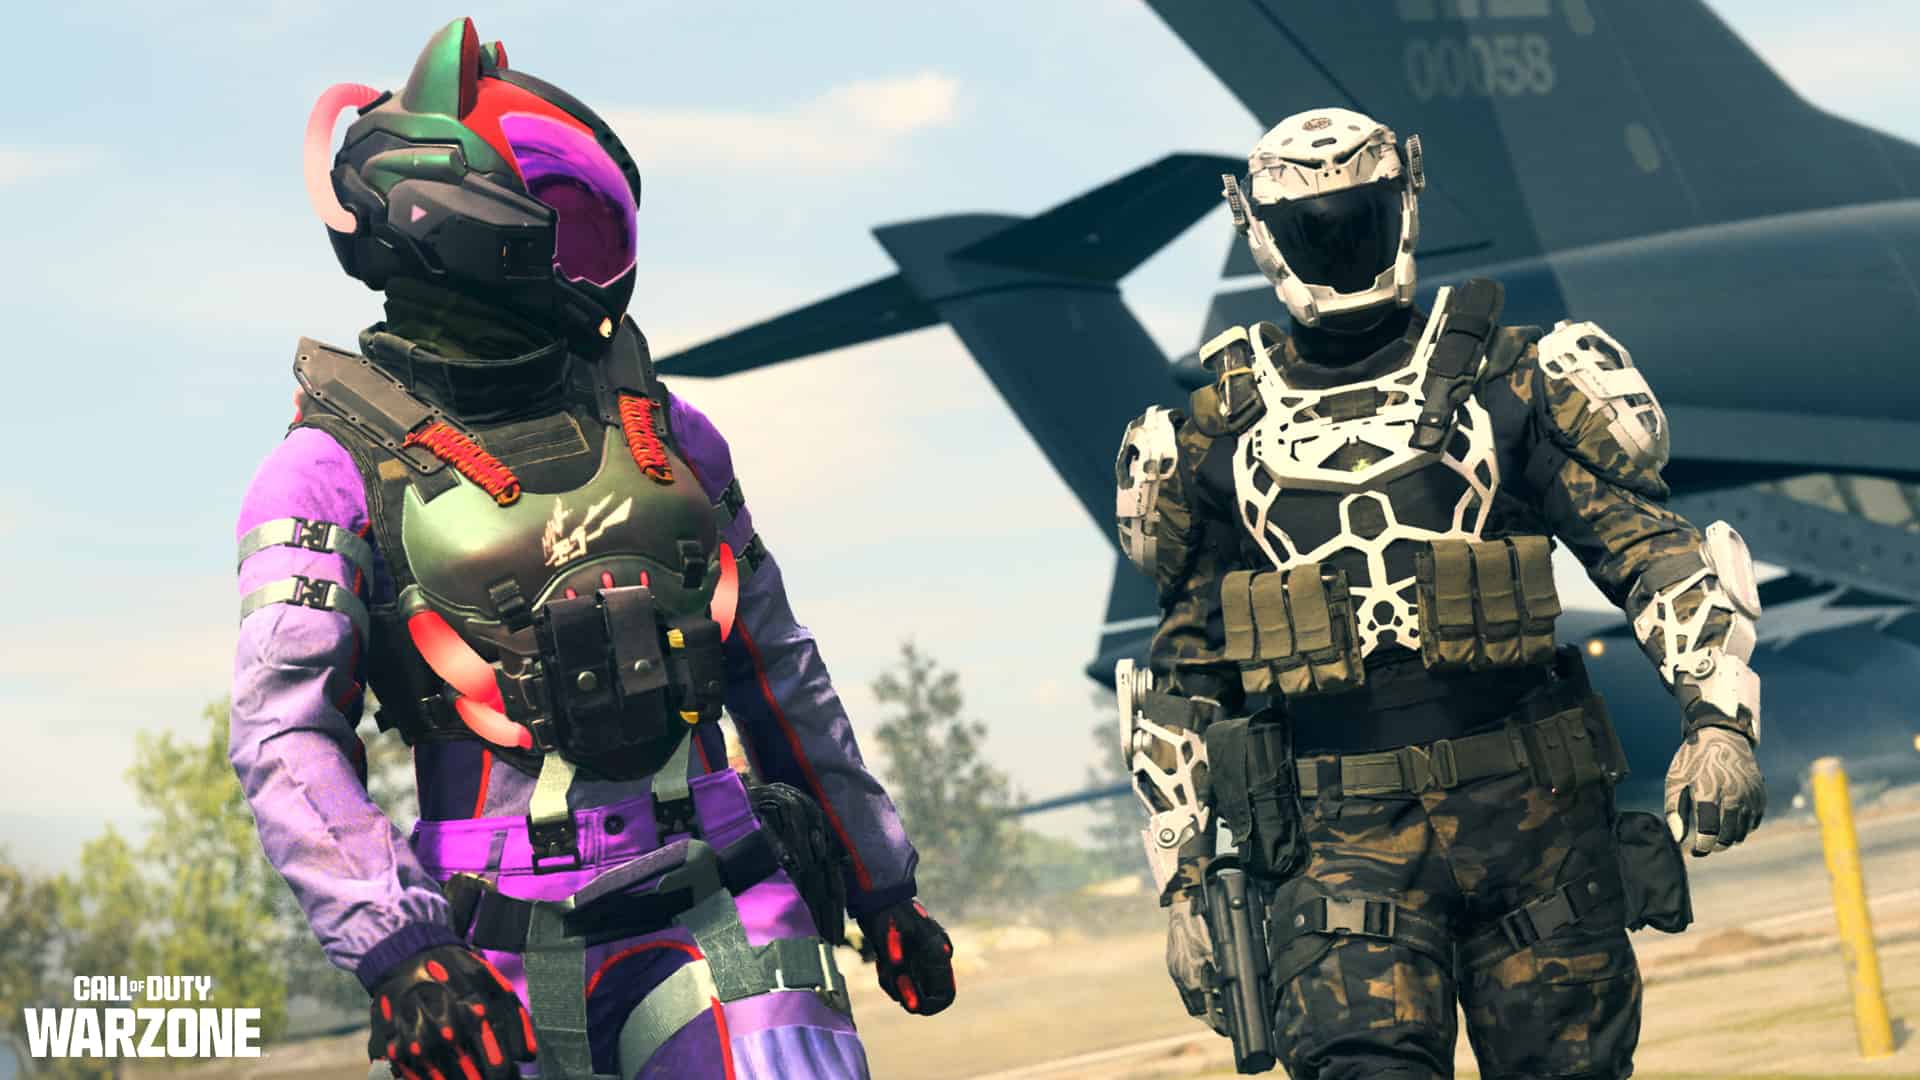 A man and a woman in armor standing next to a plane, showcasing the upcoming MW3 Season 1 Reloaded content.